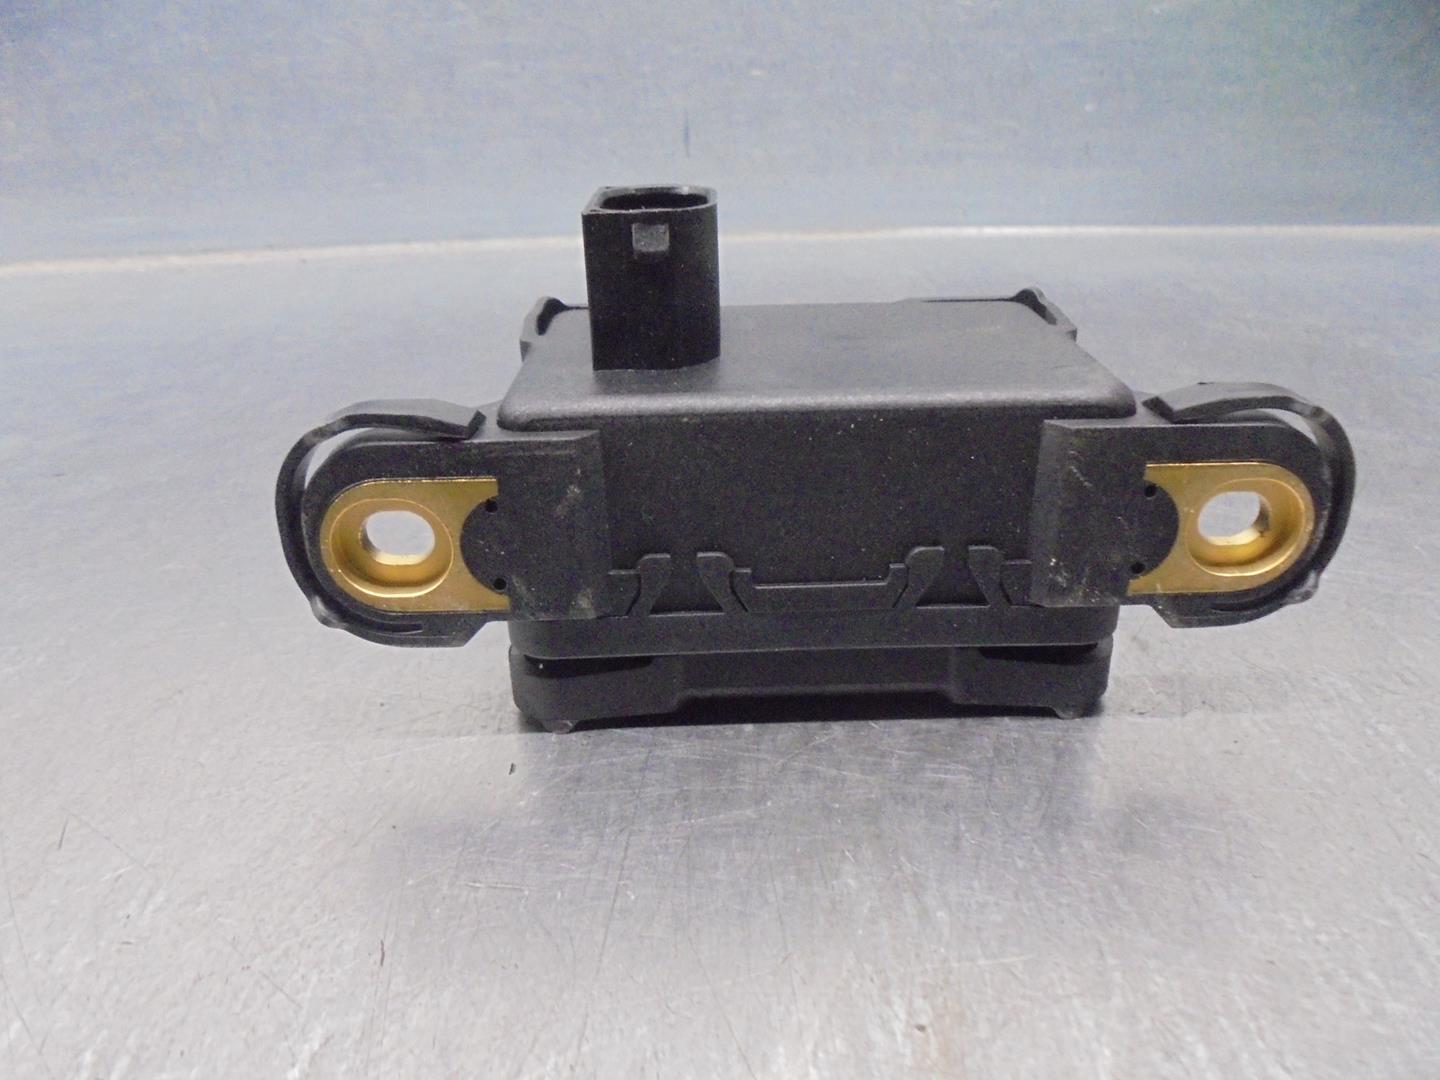 MERCEDES-BENZ M-Class W164 (2005-2011) Other Control Units A0045423918, 10170103823, ATE 24196641